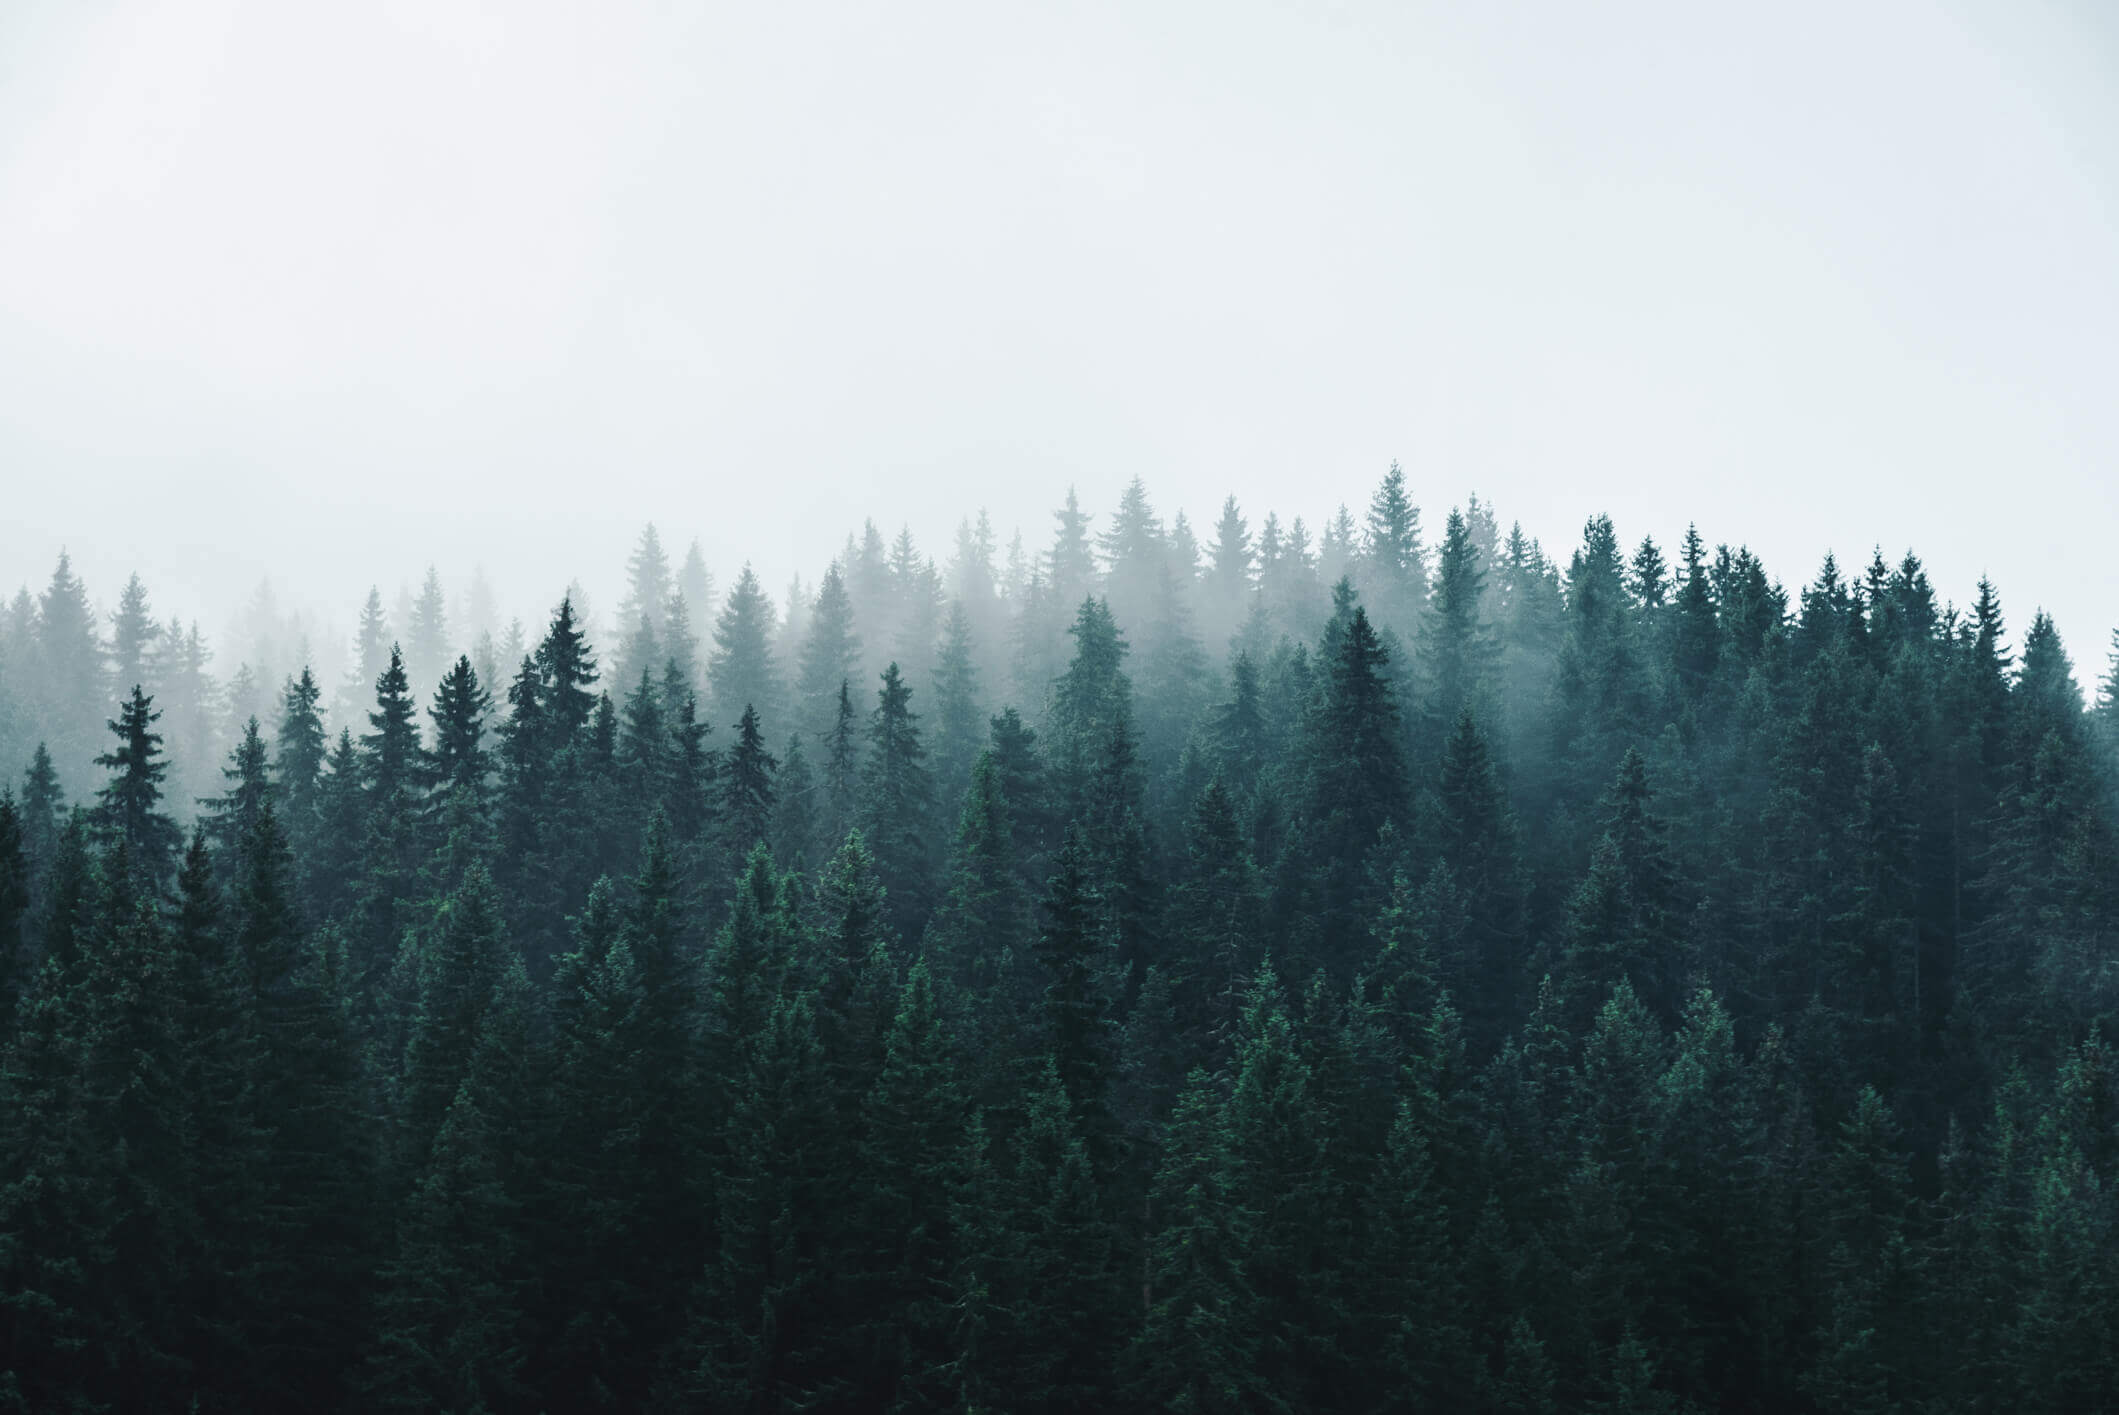 A view of a foggy forest